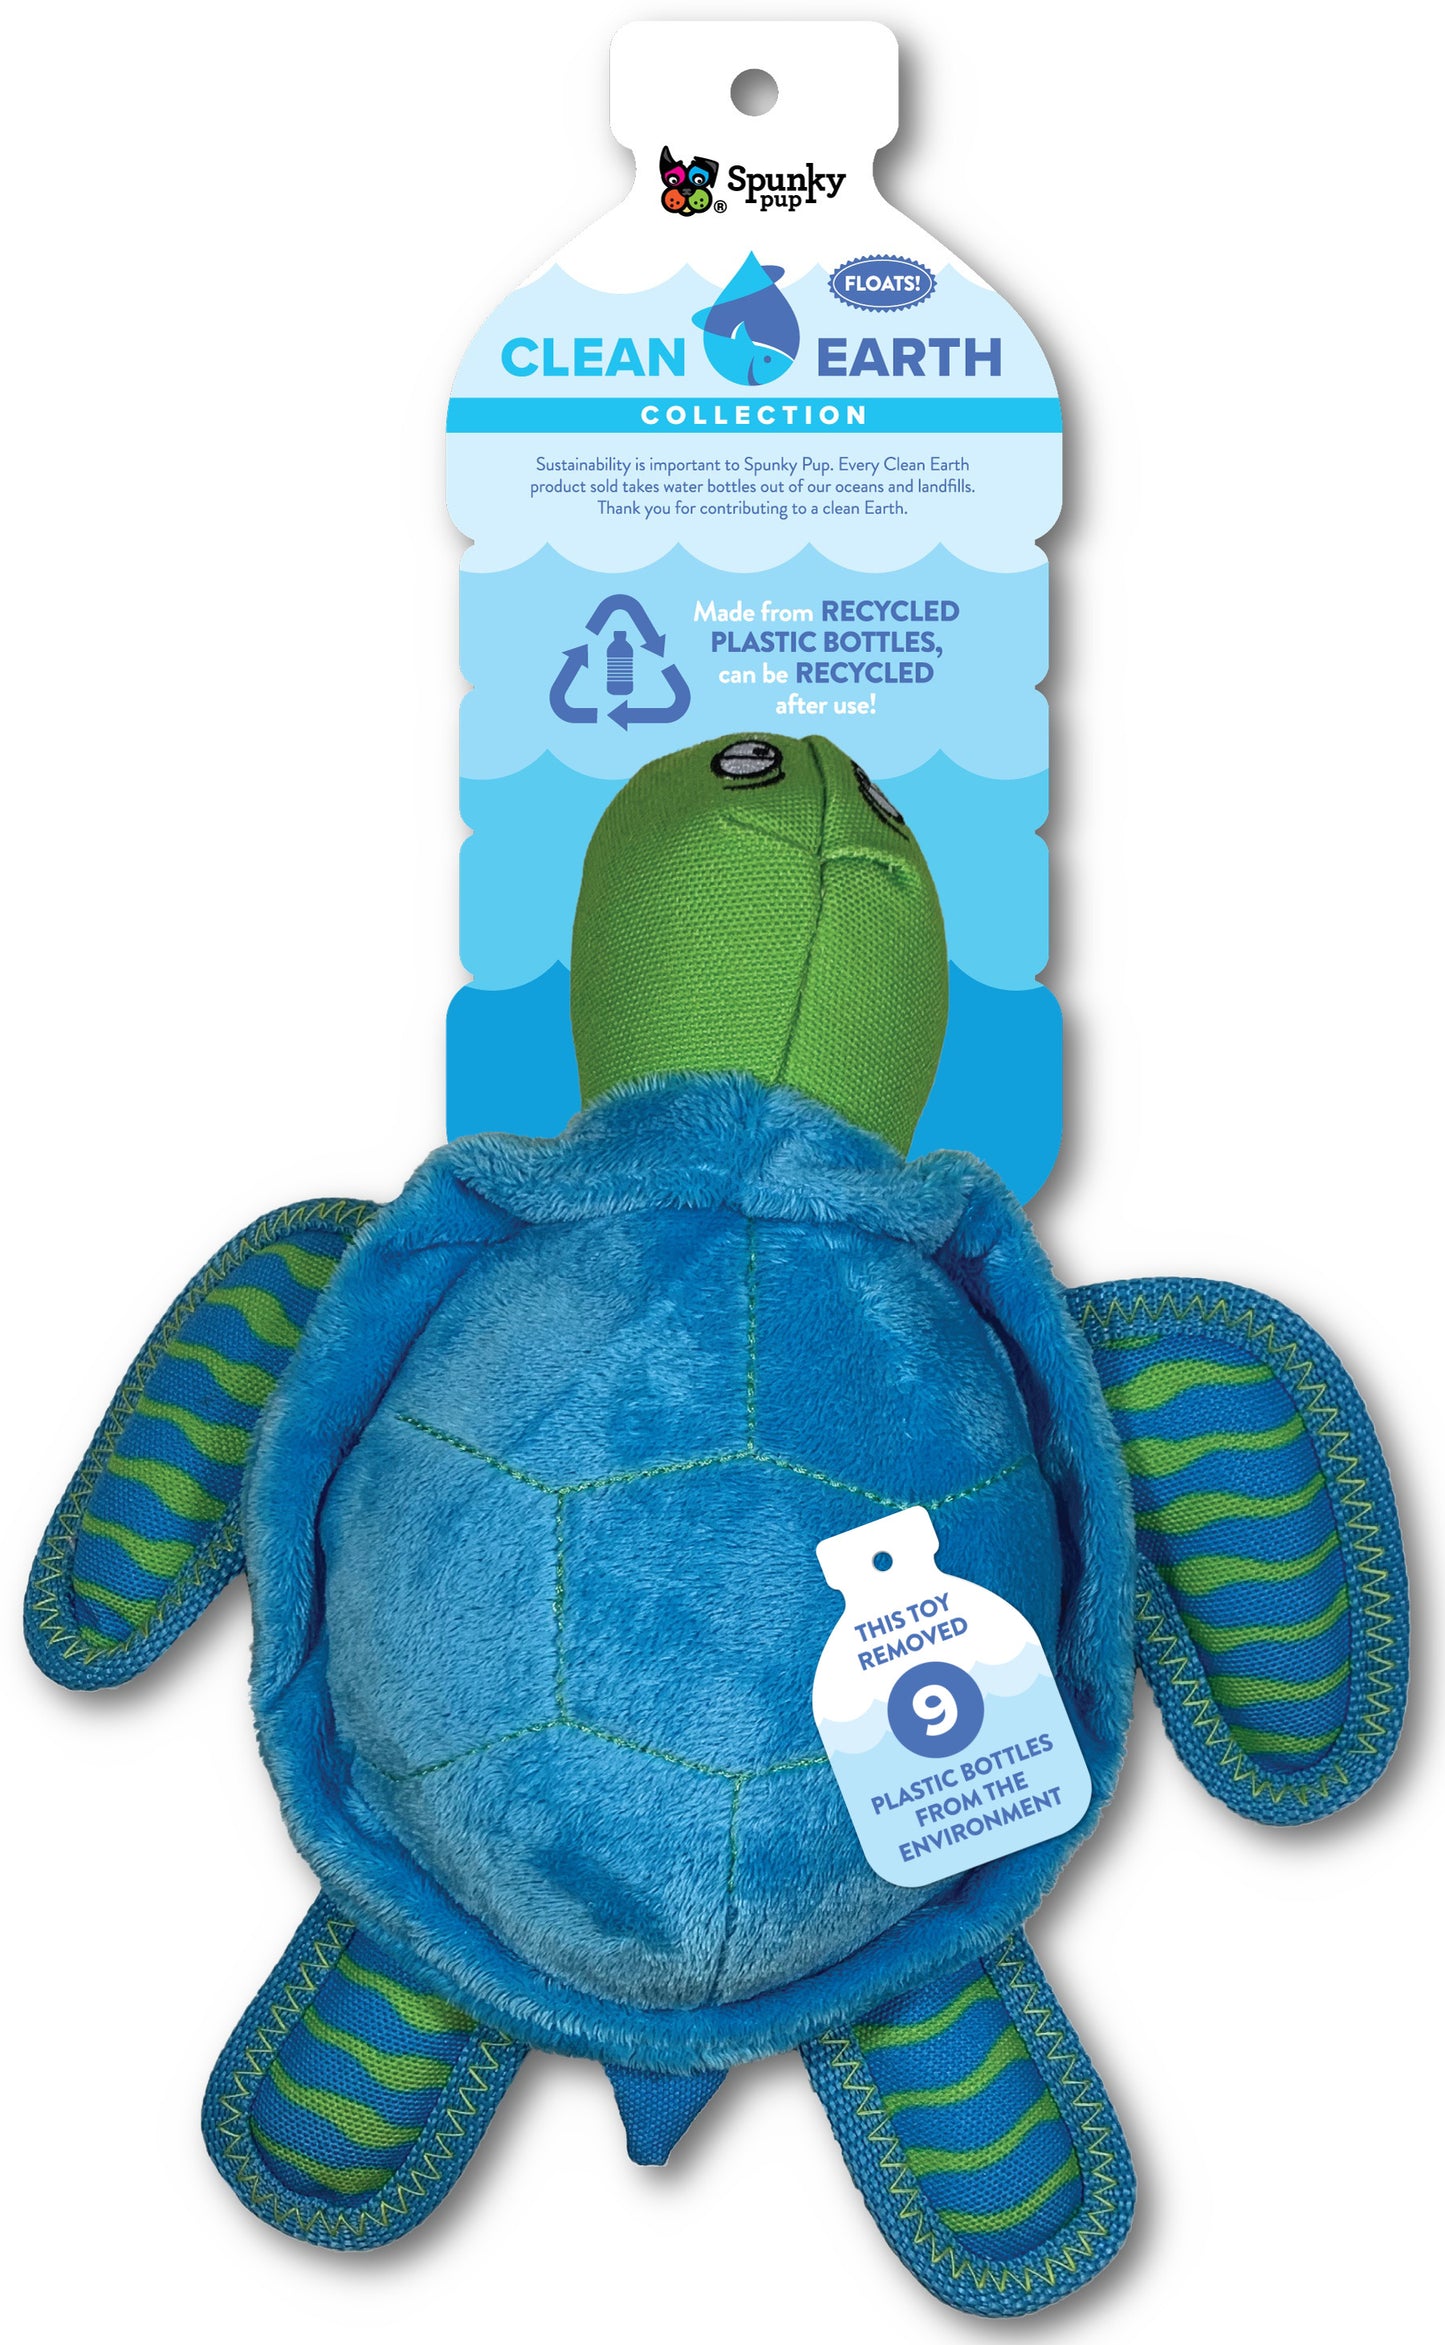 Clean Earth Plush - 100% Sustainable